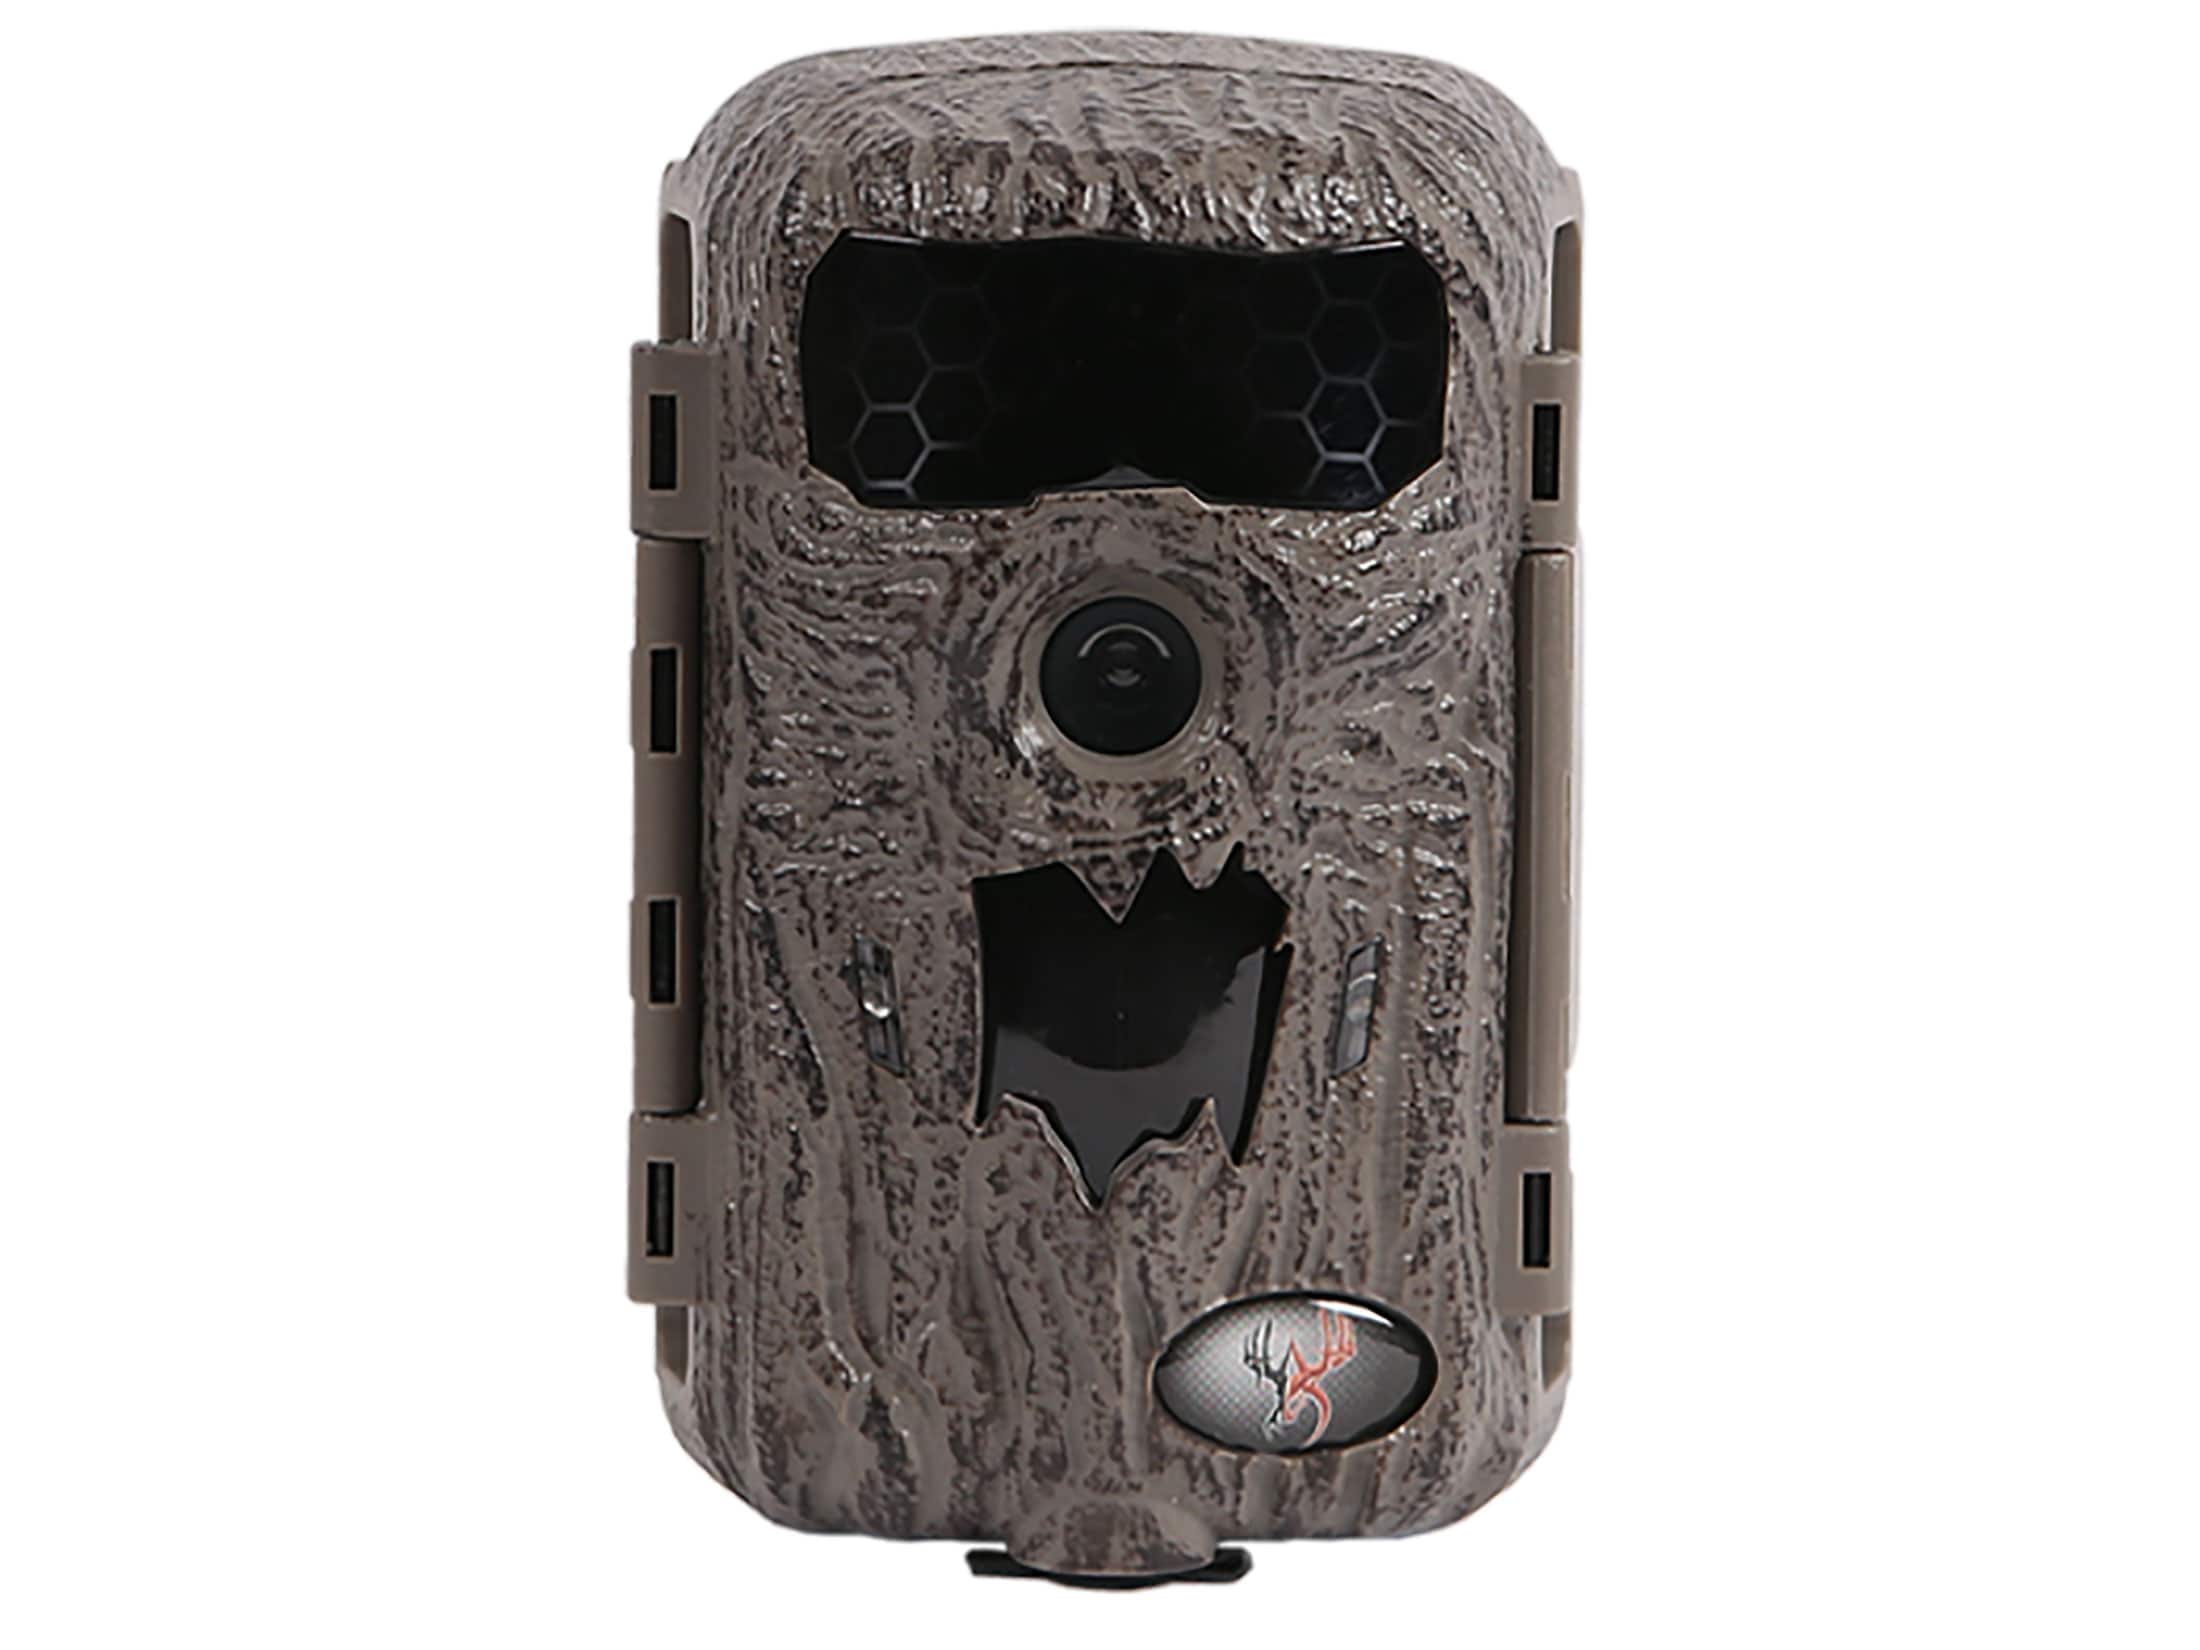 Wildgame Innovations Illusion 10 Lightsout Micro Infrared Game Camera